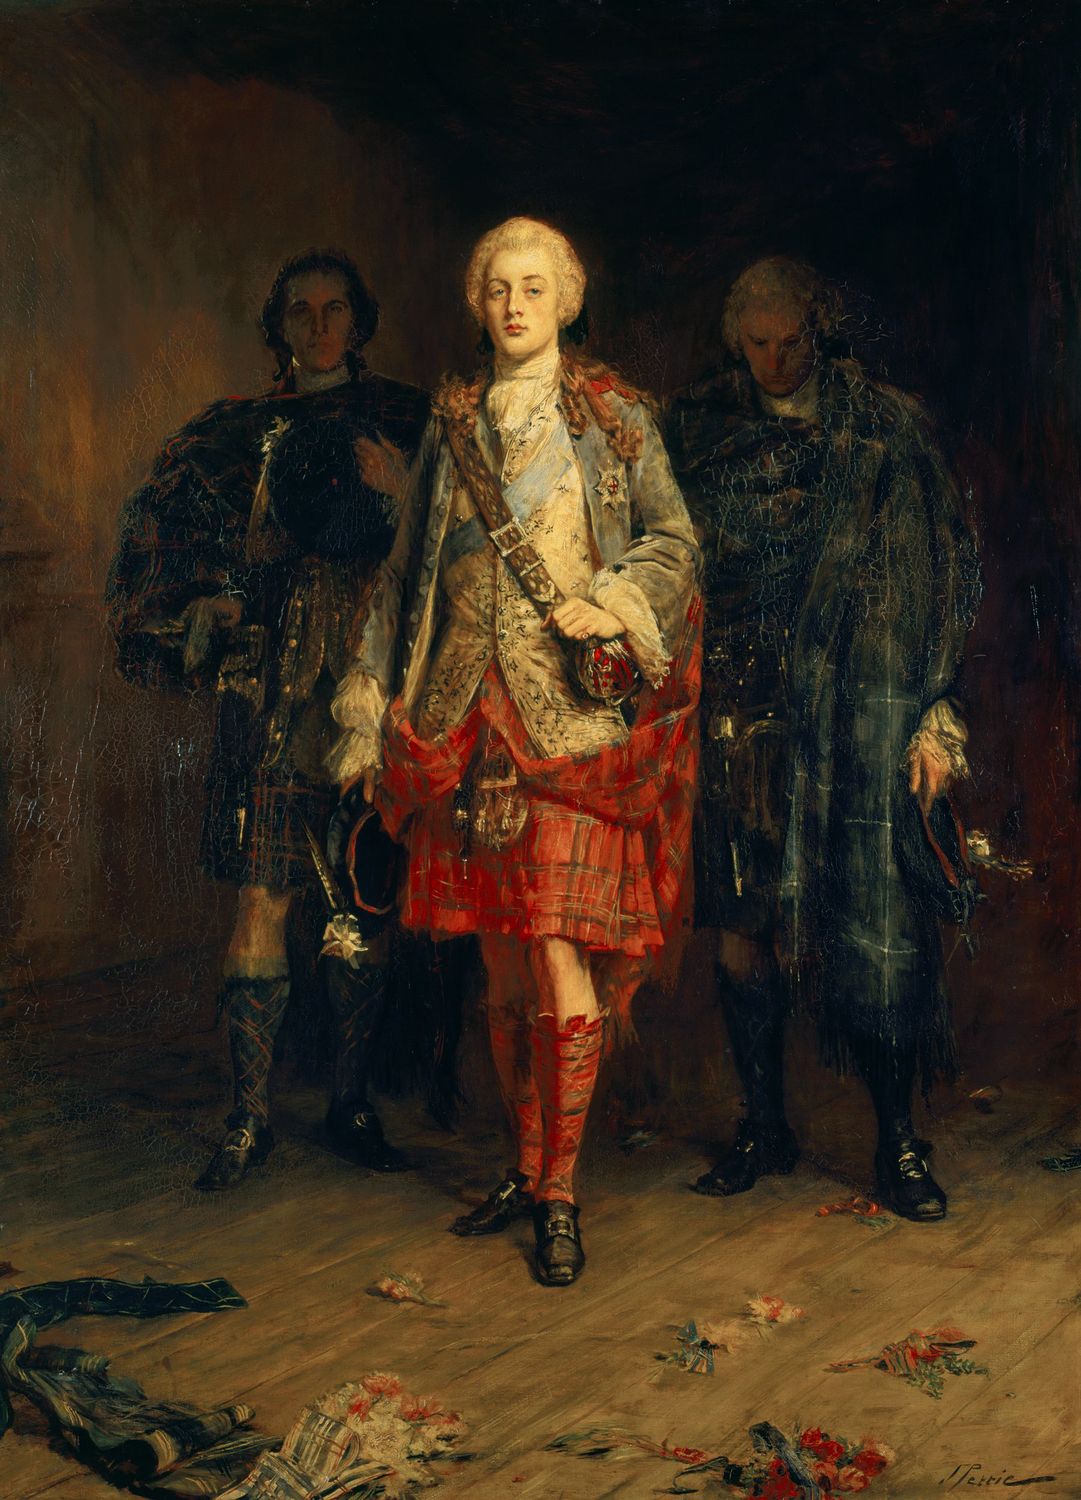 Painting: Bonnie Prince Charlie by John Pettie